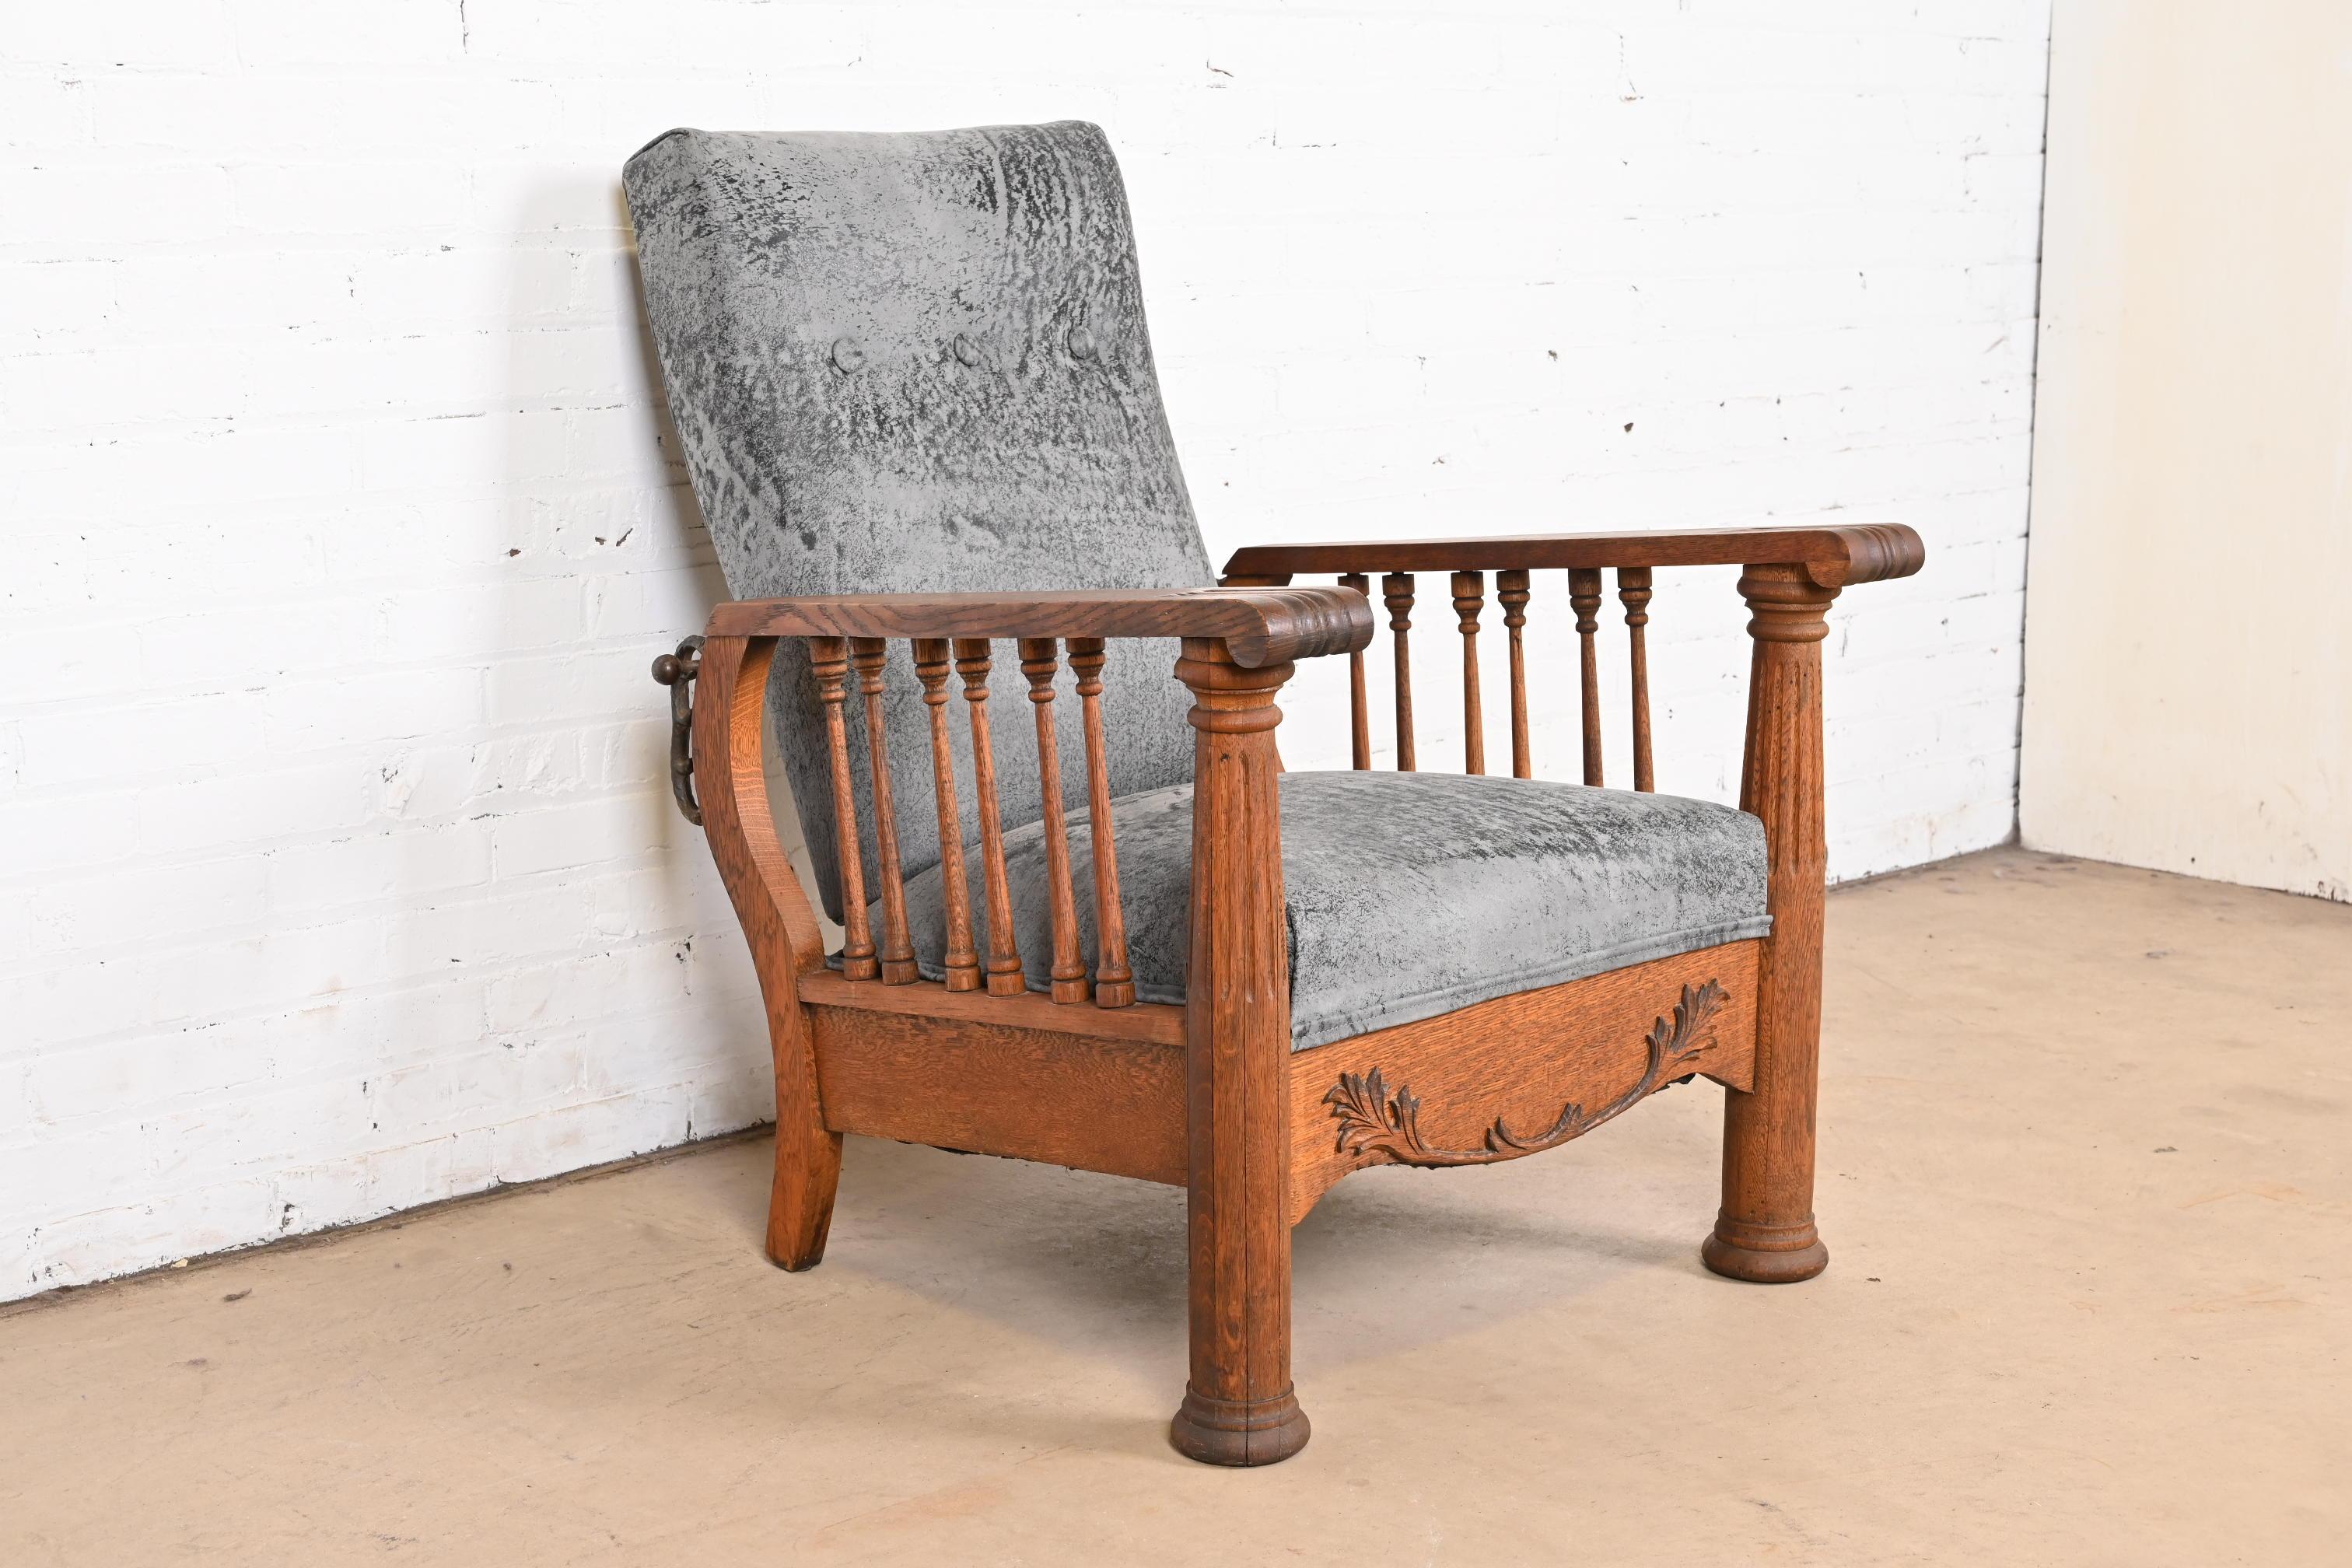 American Antique Mission Arts & Crafts Oak and Leather Reclining Morris Chair, circa 1900